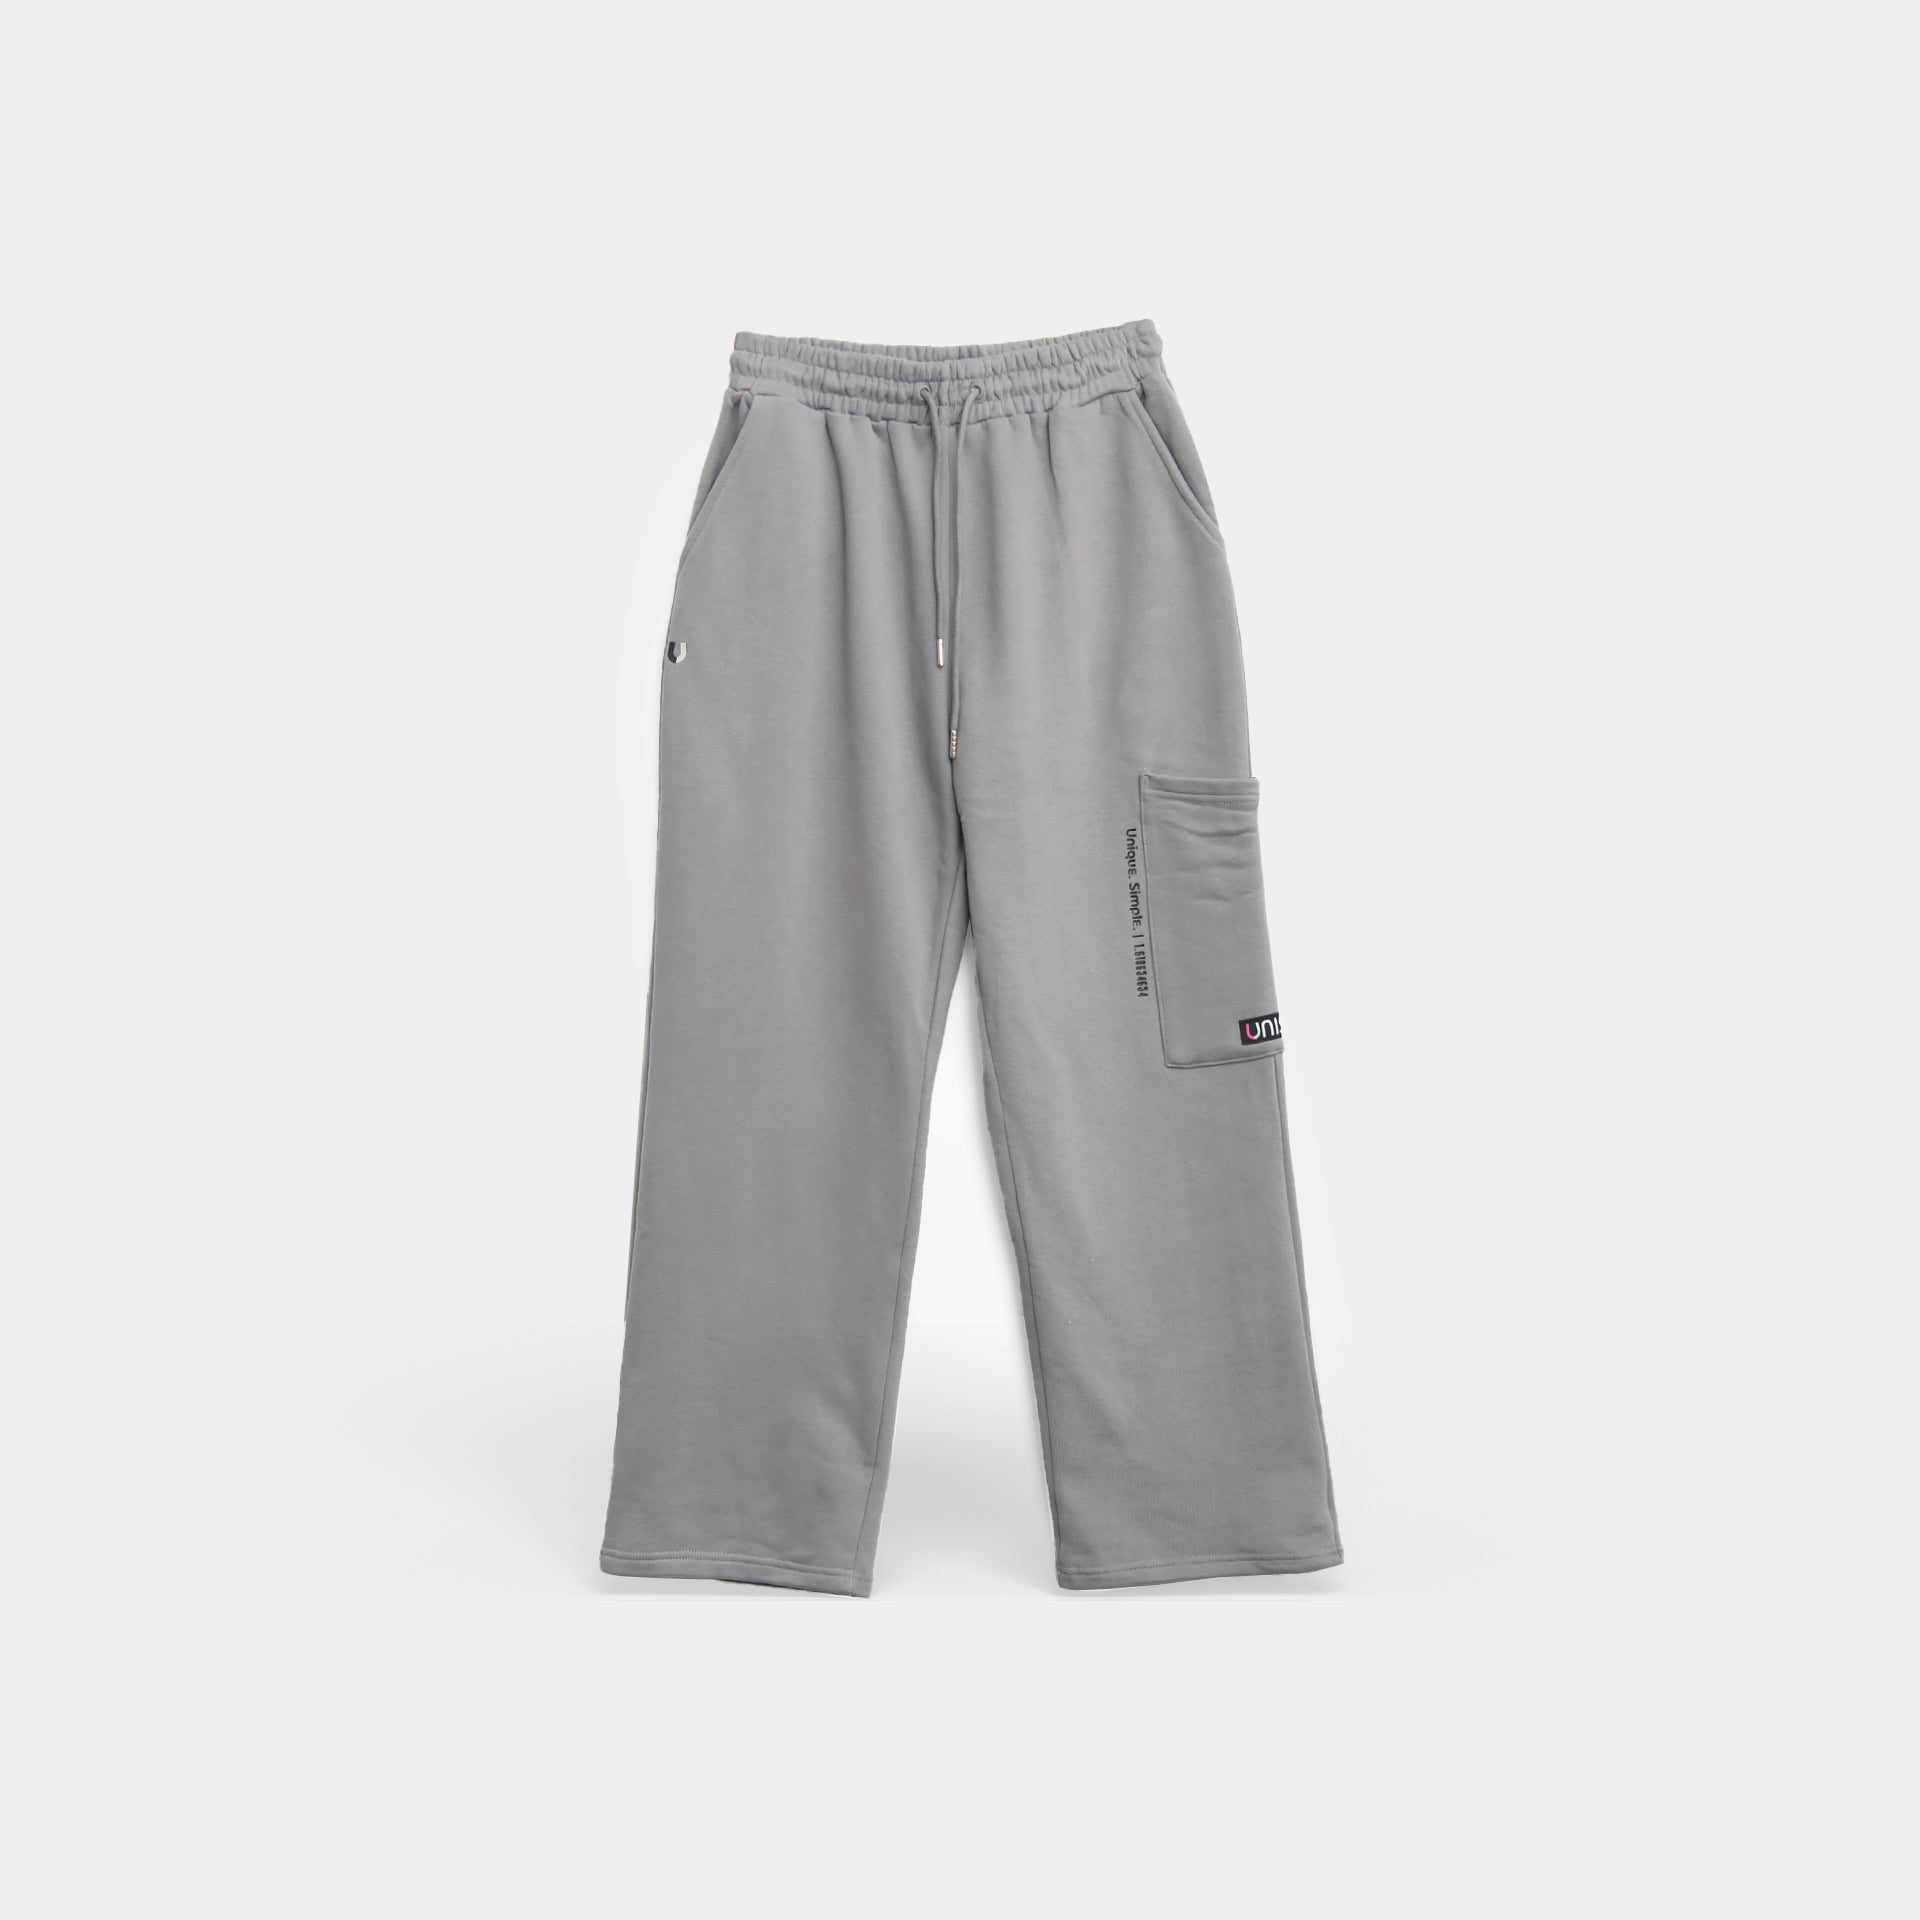 Gray Sweatpants From Unisi